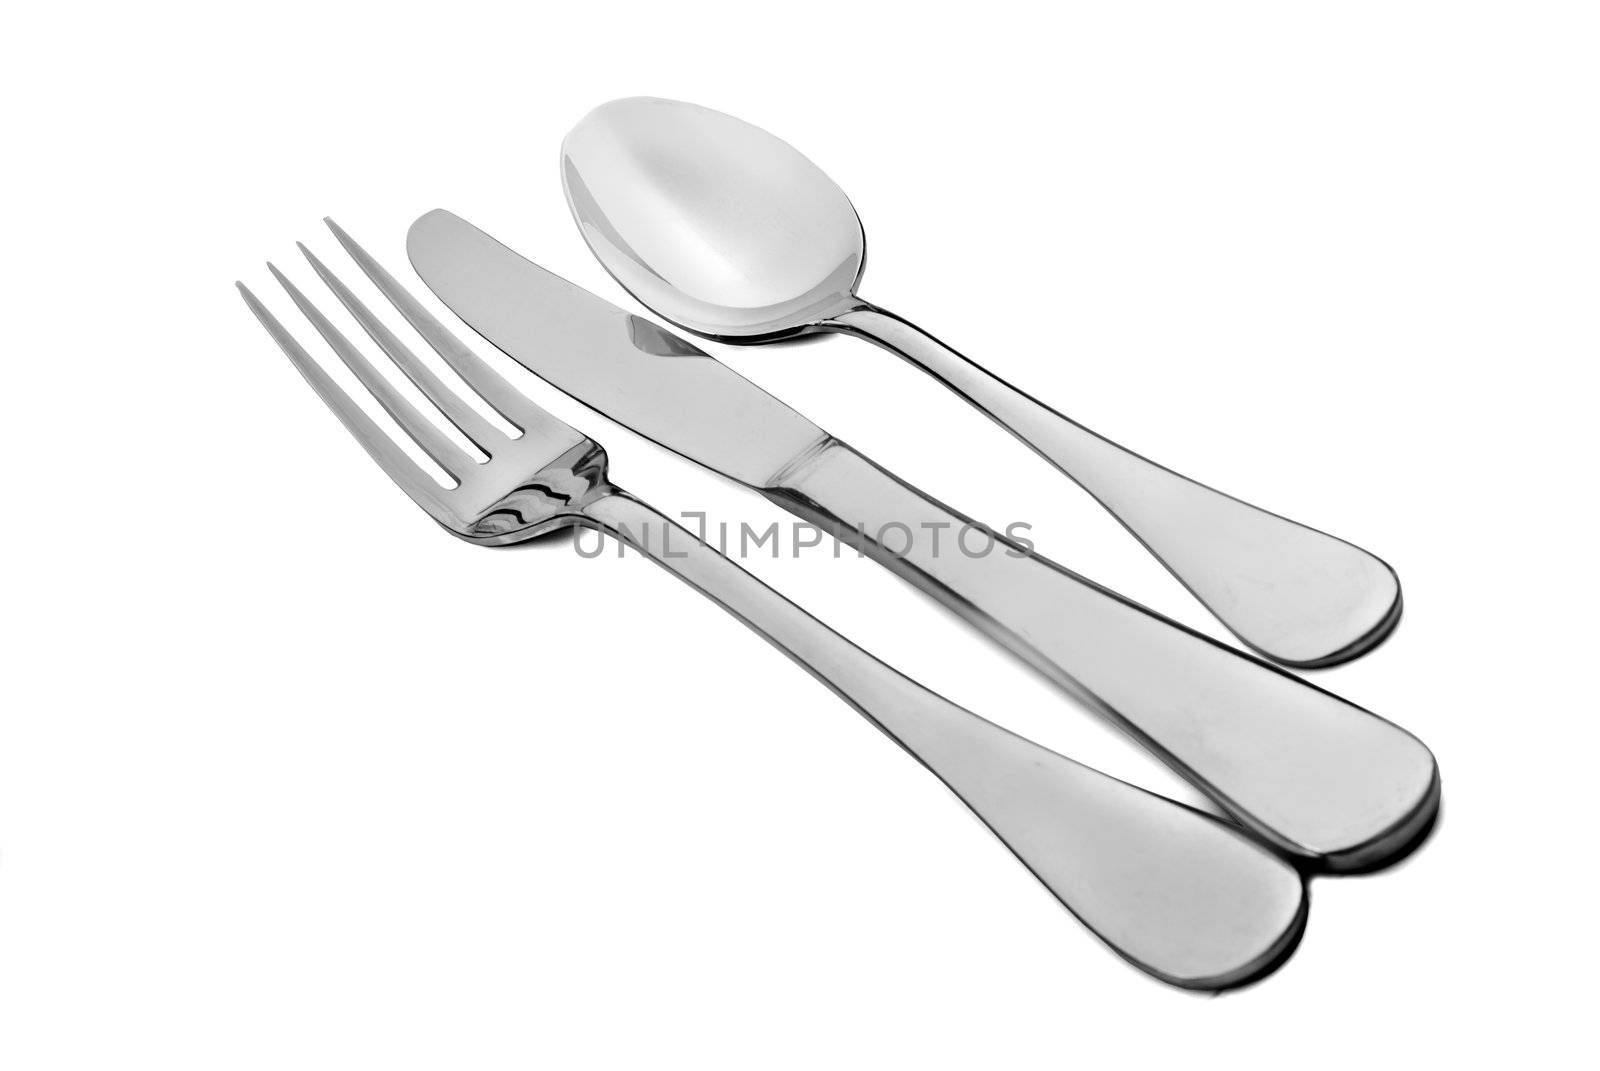 Spoon fork and knife on a white background by tish1